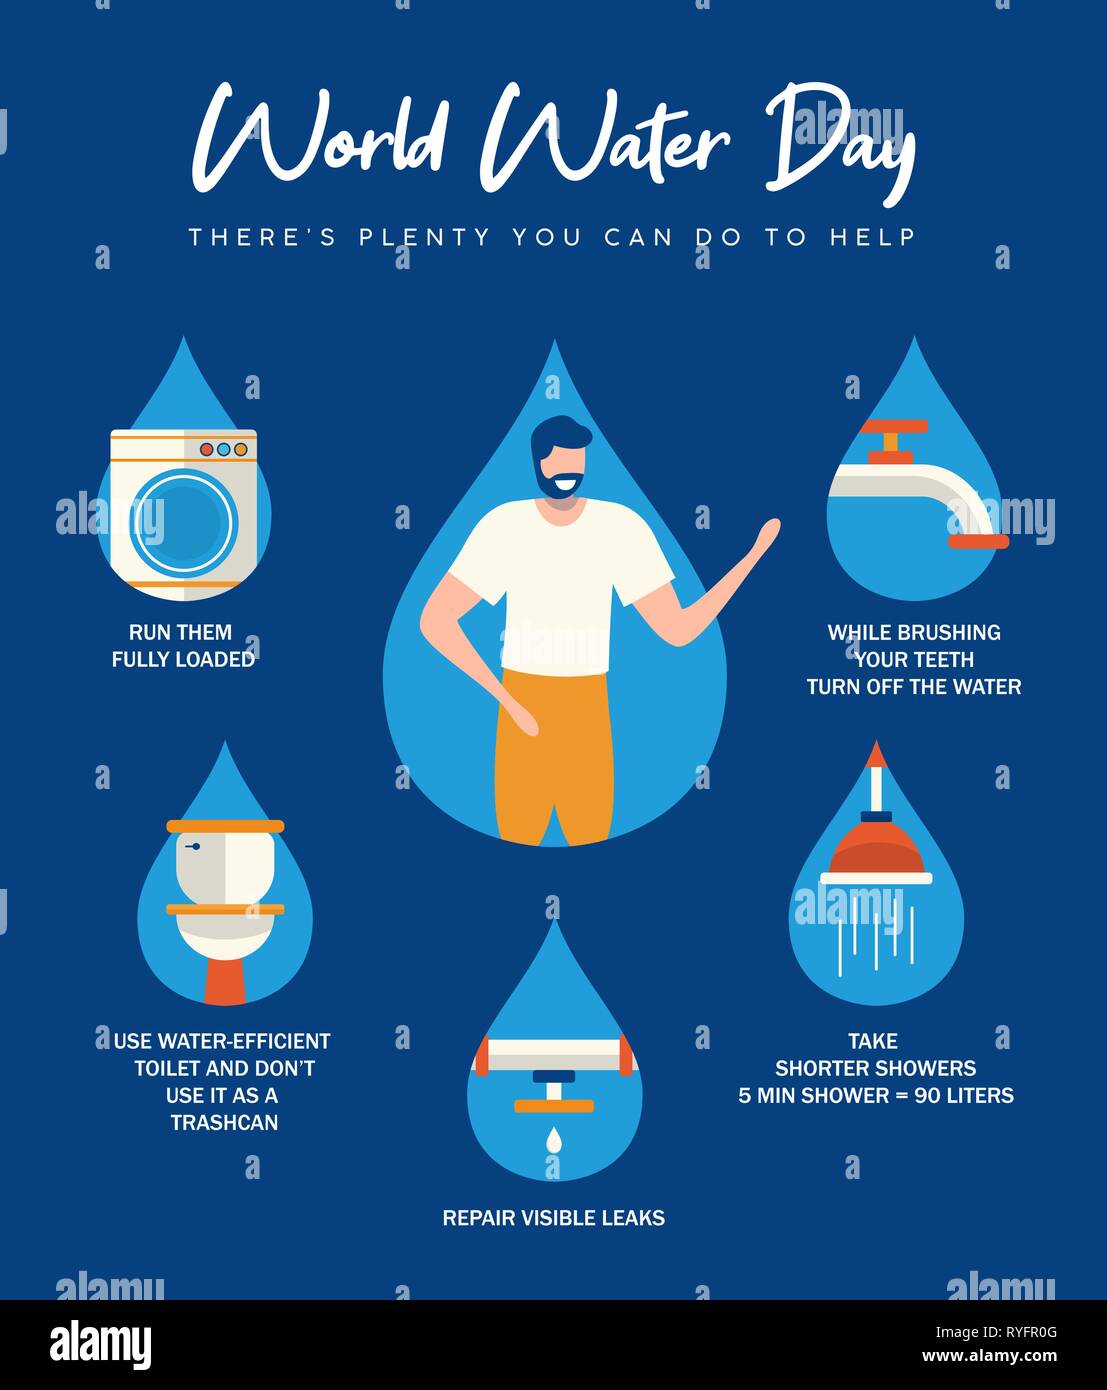 World Water Day infographic illustration with information about domestic help from home. Bathroom, pipes and running waters activities for awareness c Stock Vector